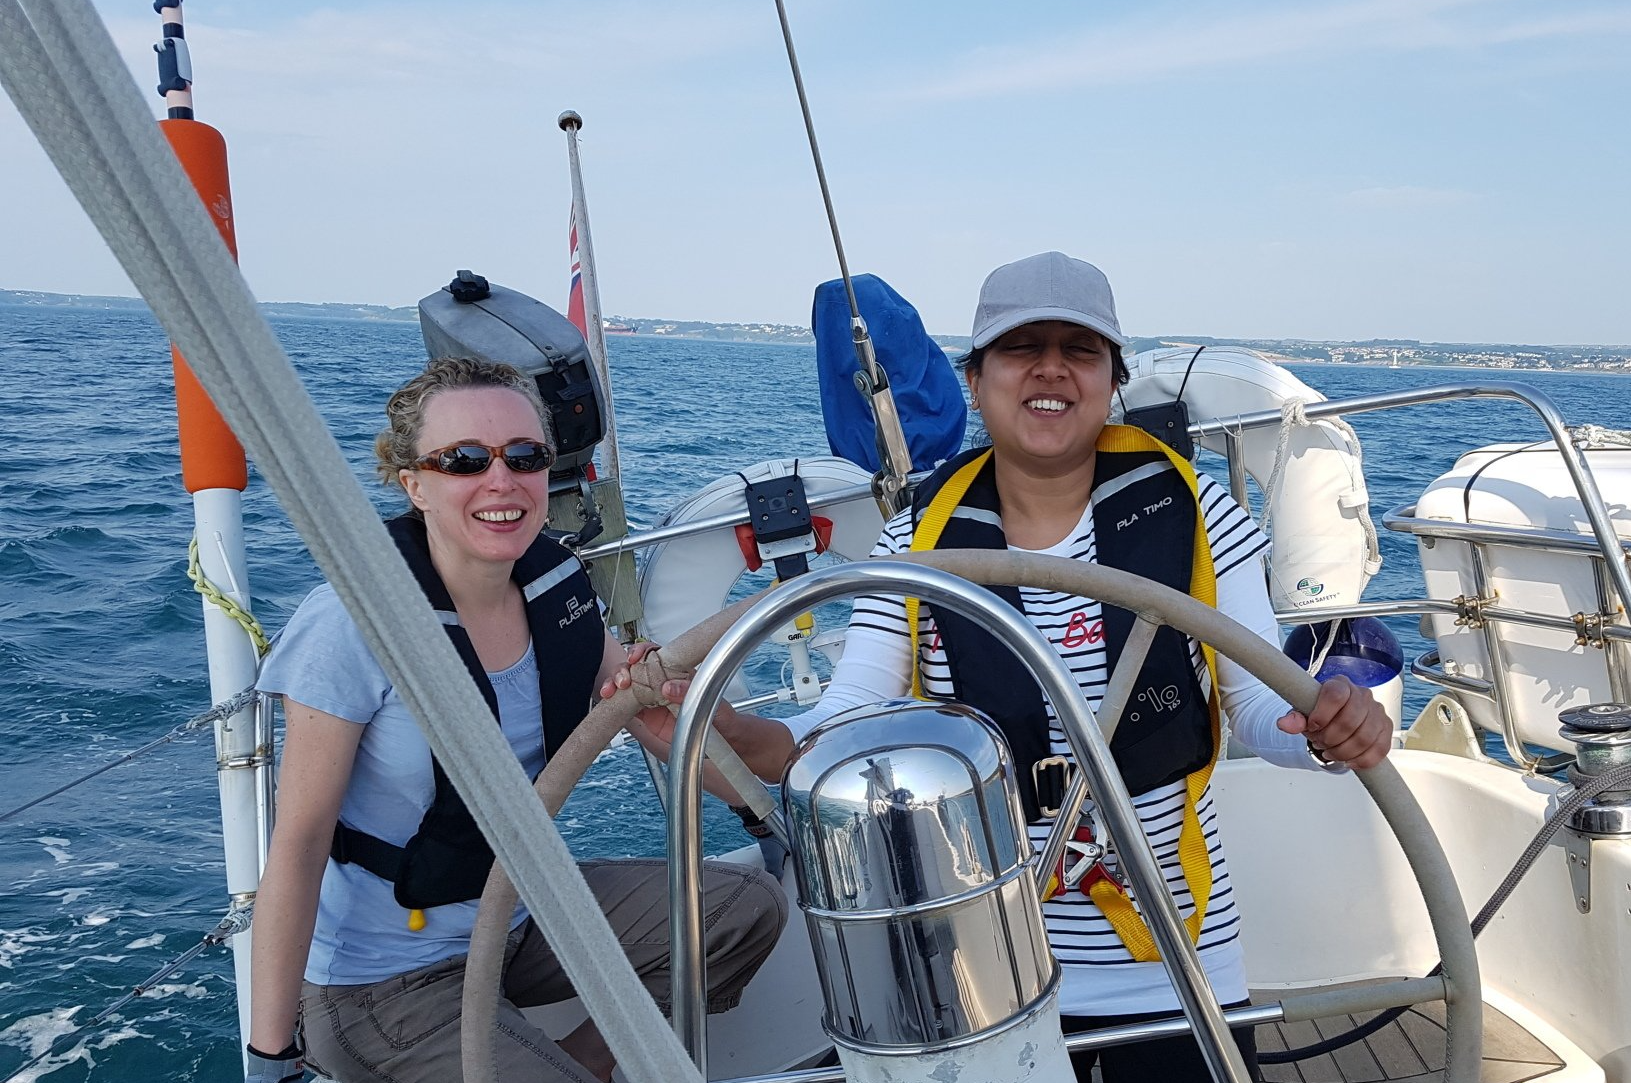 A picture of a smiling female VI sailor at the wheel, and a smiling female sighted crew member next to her. Calm conditions.